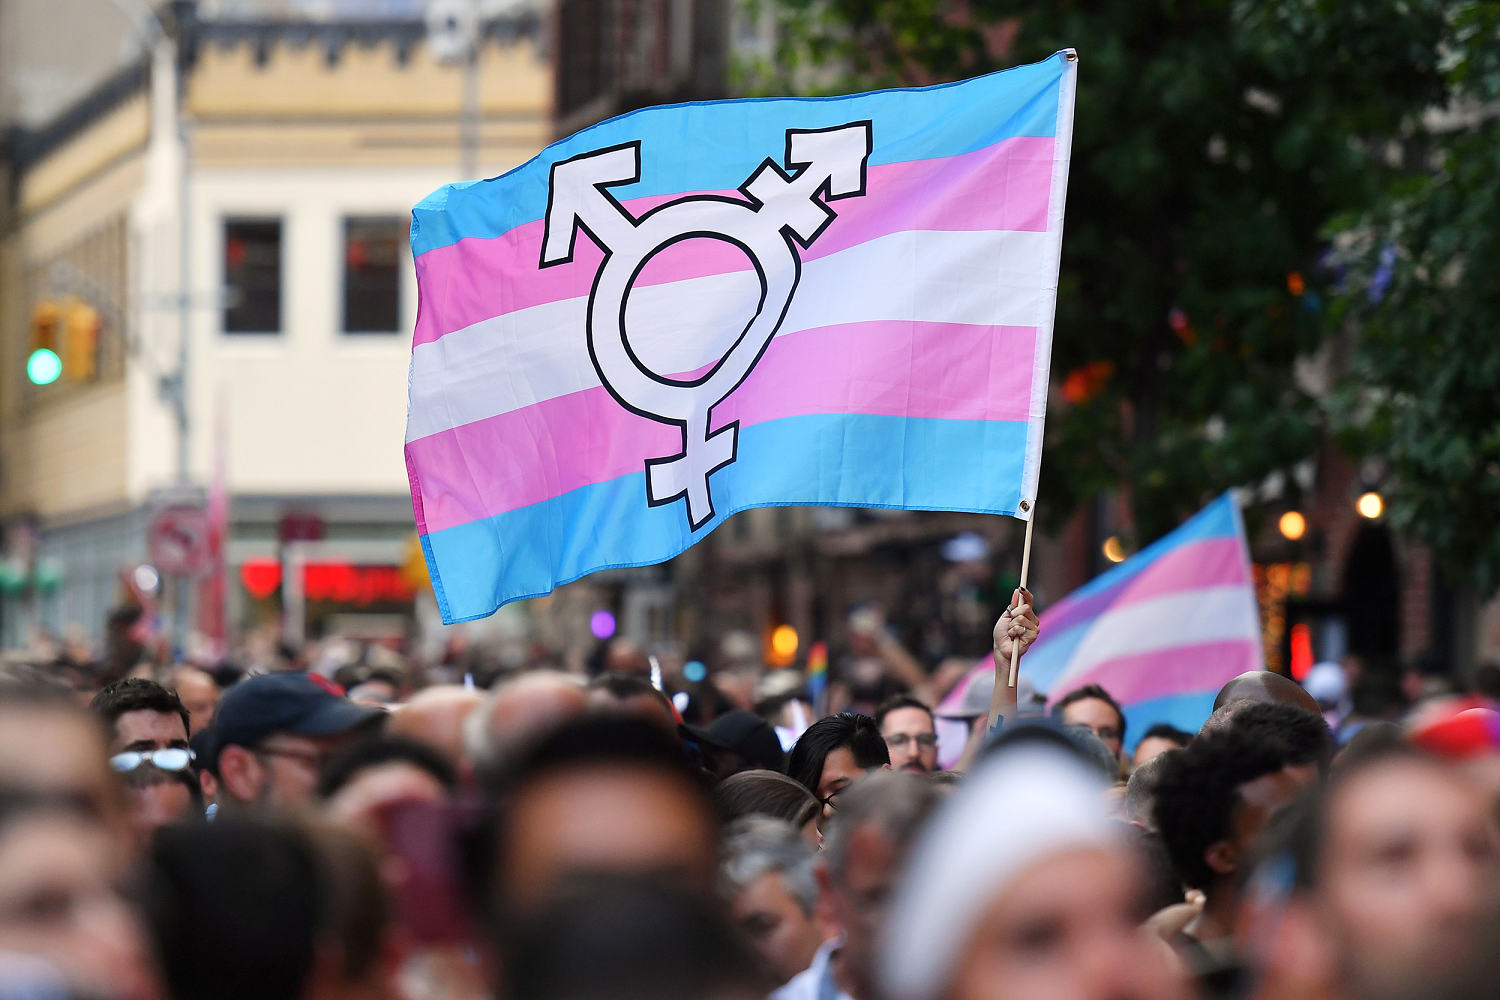 At least 33 trans and gender-nonconforming people were killed in the past year, report finds